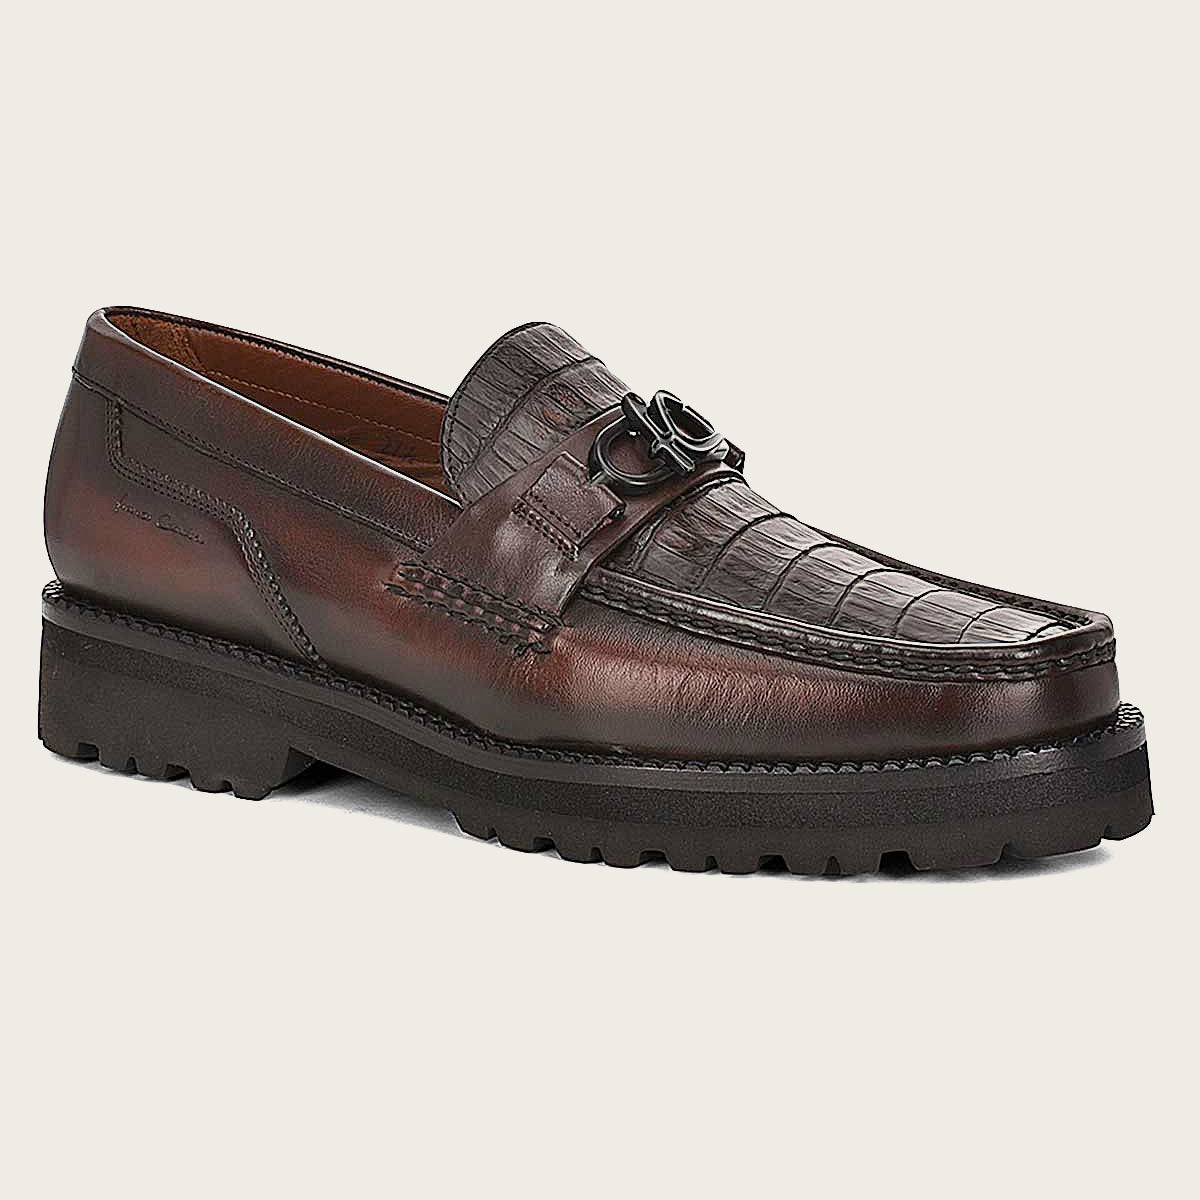 Brown leather men loafer, Cayman leather and bovine leather